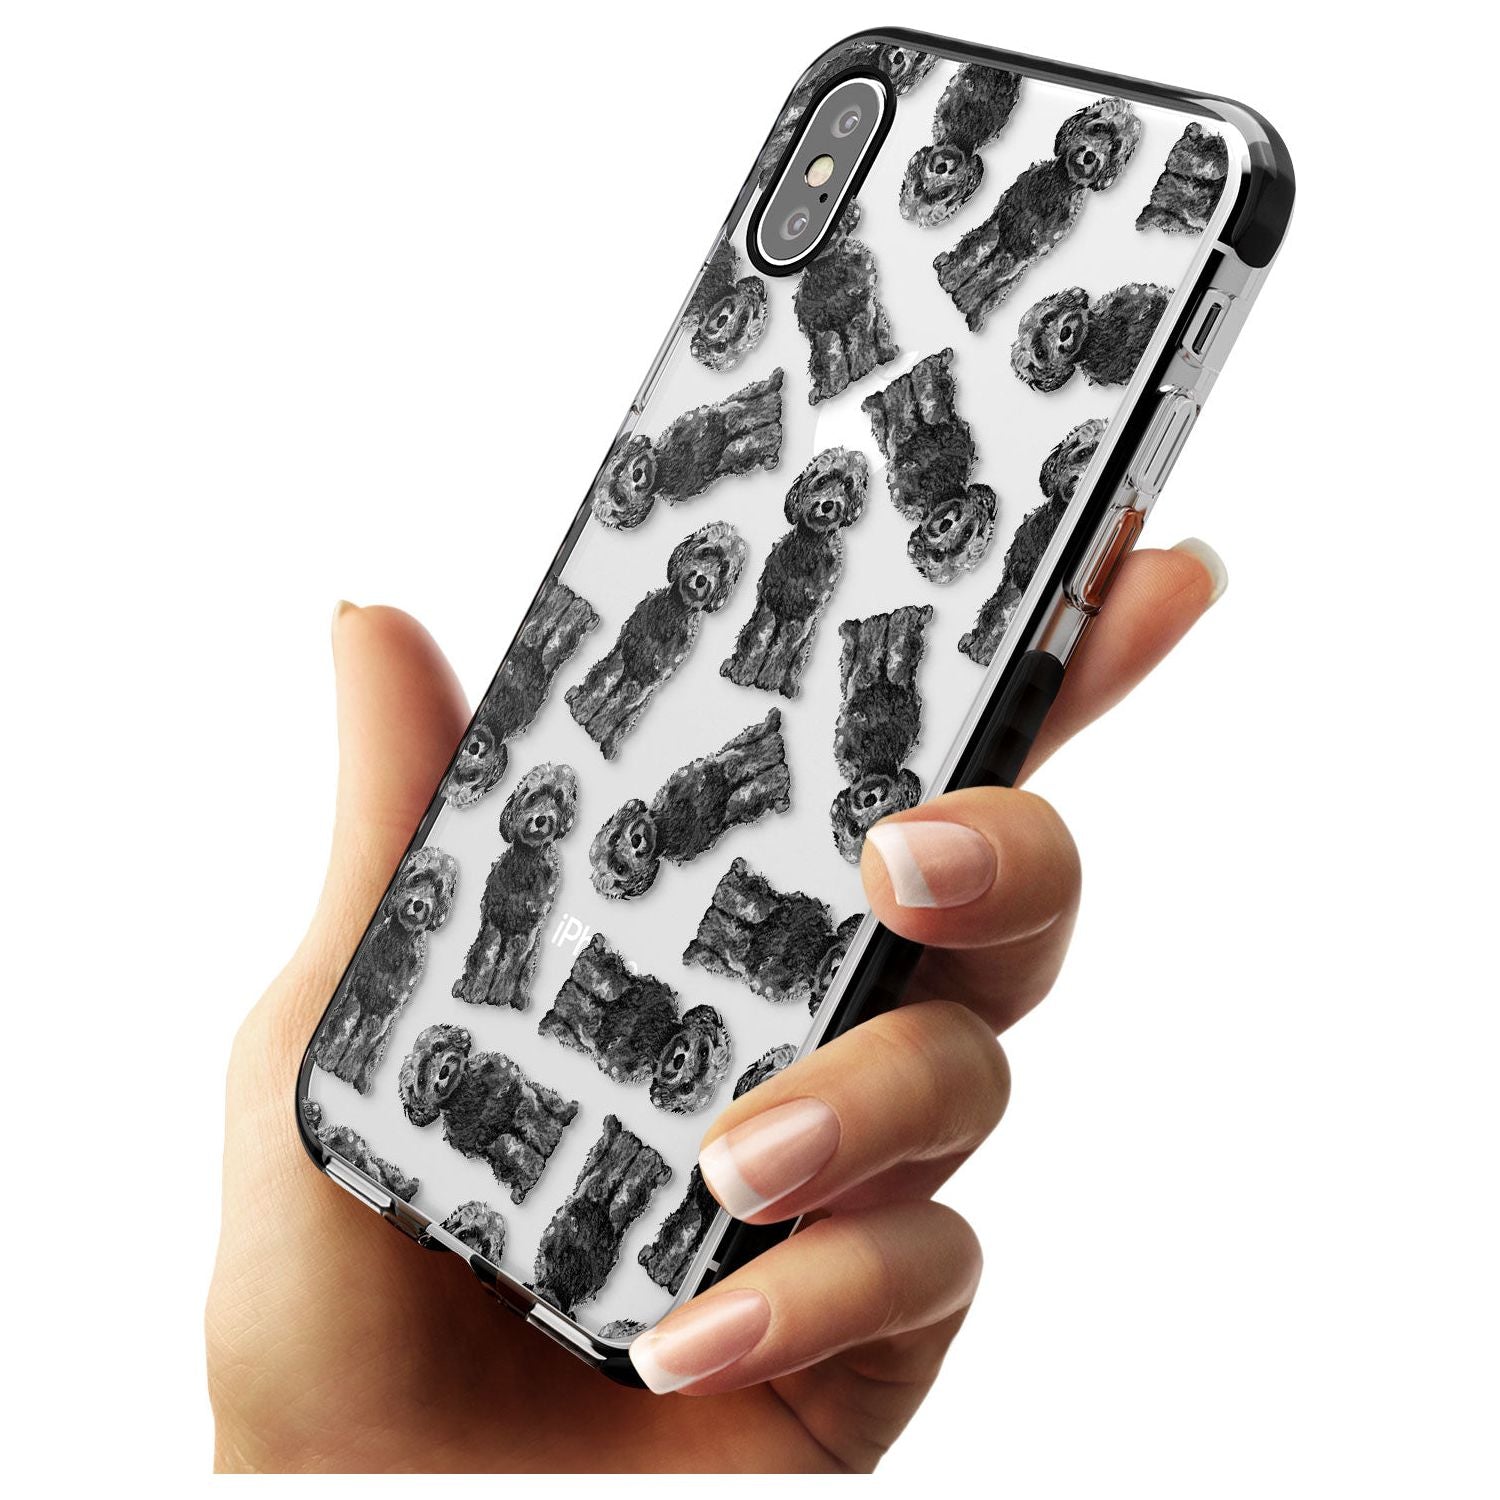 Cockapoo (Black) Watercolour Dog Pattern Black Impact Phone Case for iPhone X XS Max XR